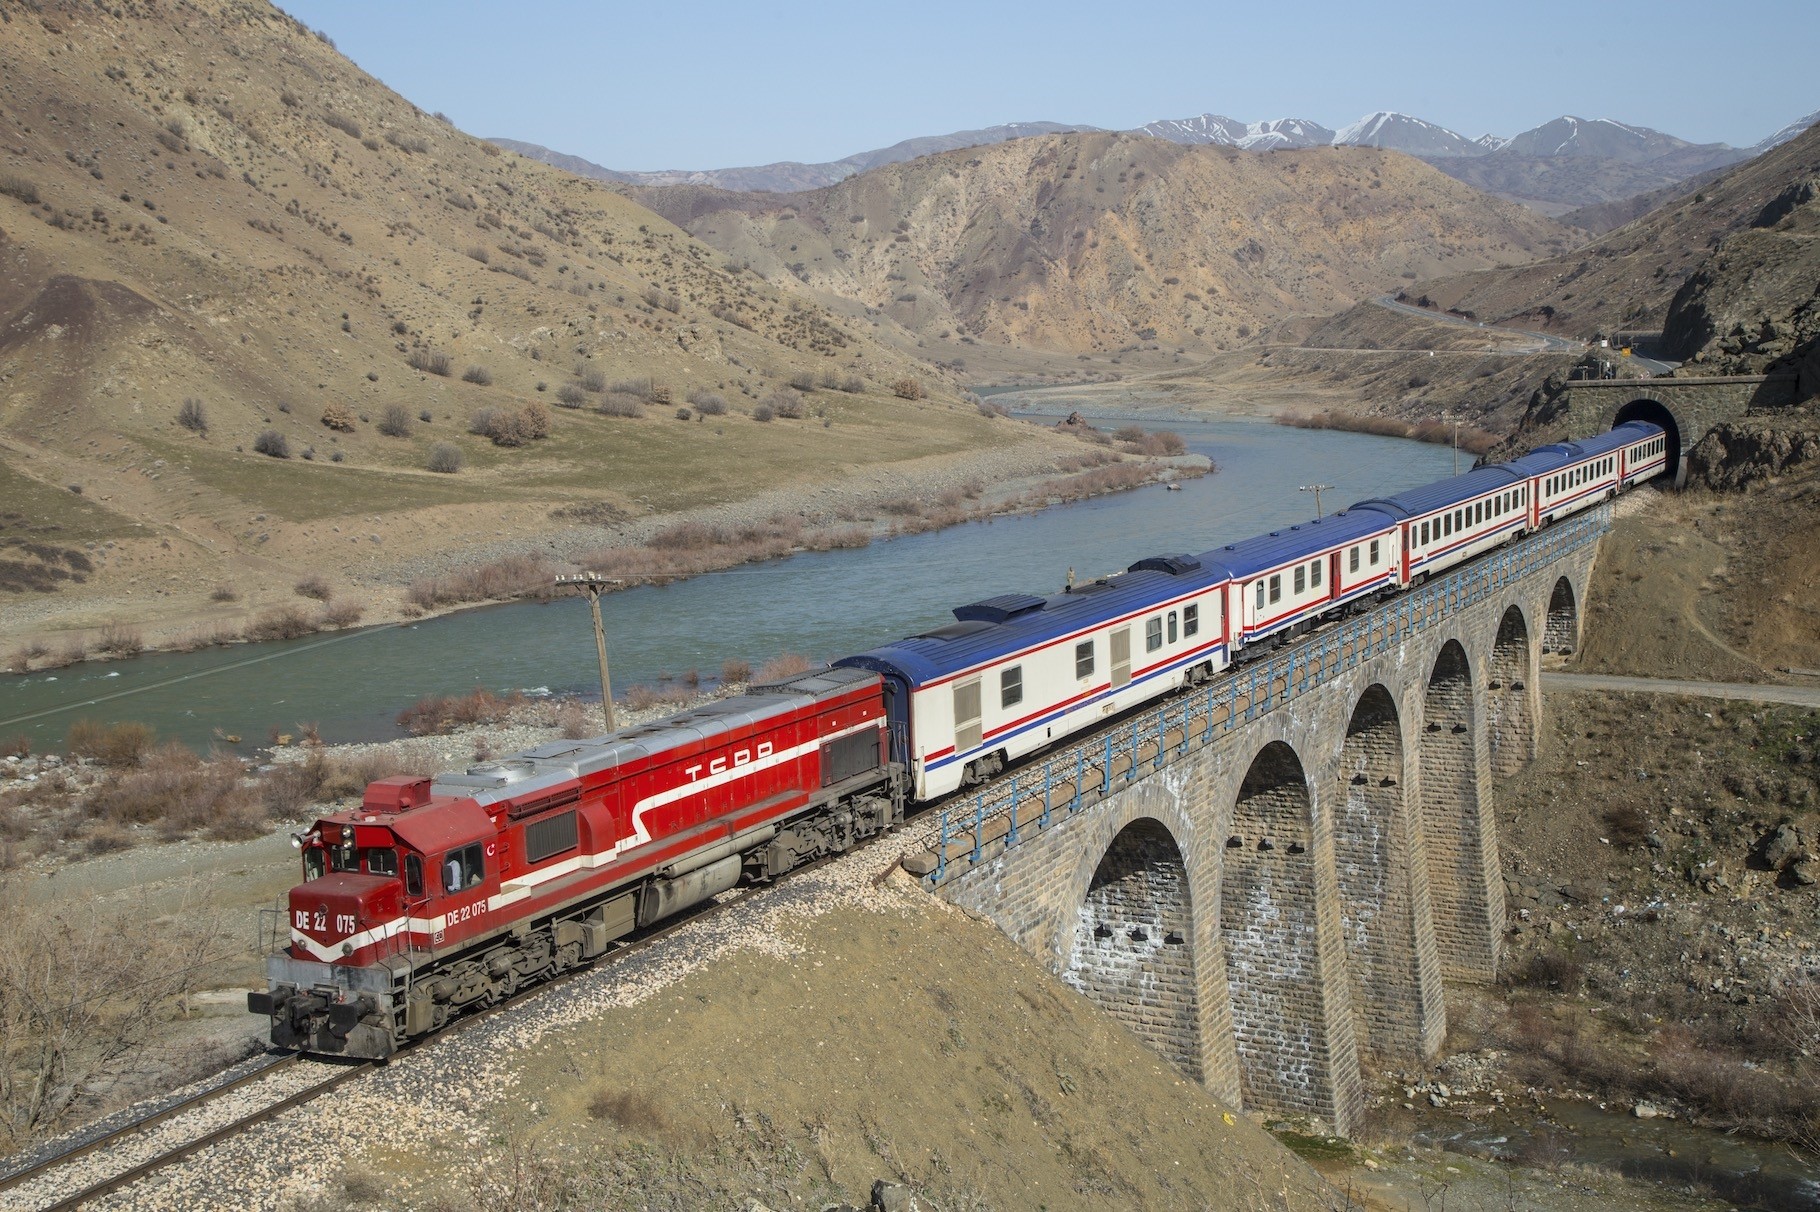 The Kurtalan Express departs from Ankara and arrives in Siirt in more than 24 hours. Although the journey is long, the train features sleeping cars that make the journey more comfortable.